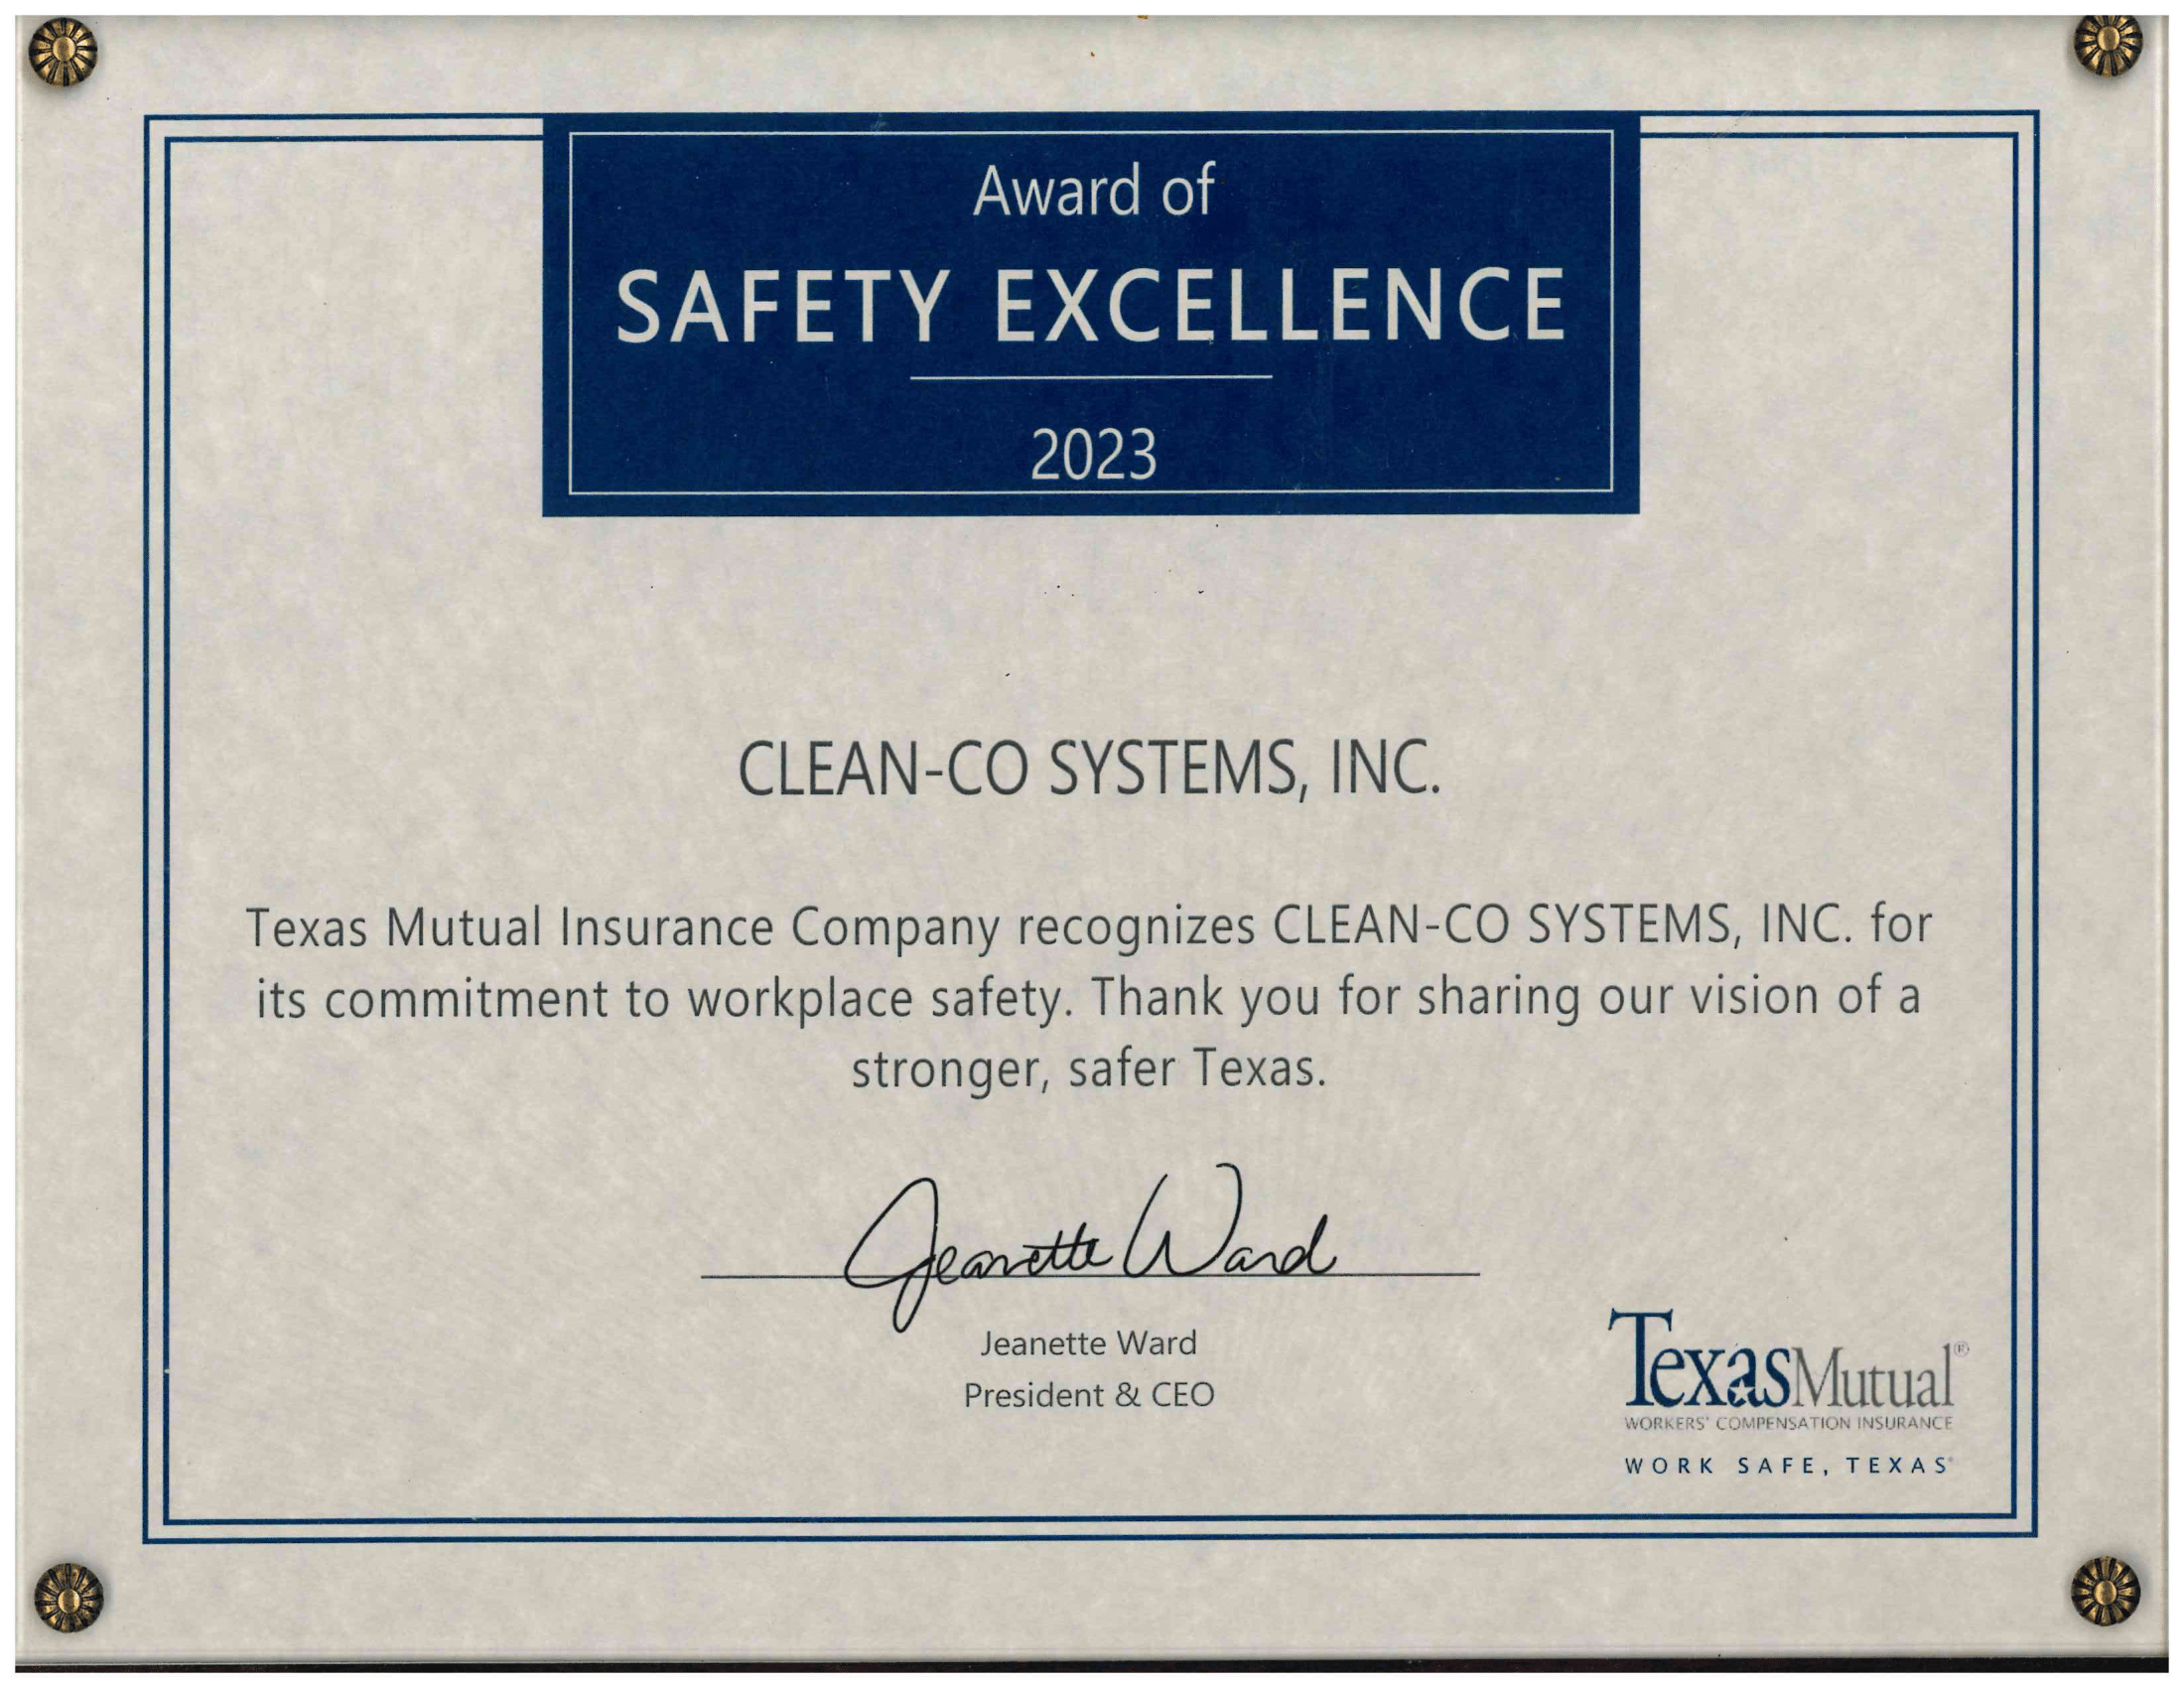 Clean-Co Systems receives Excellence in Safety Award for 2023